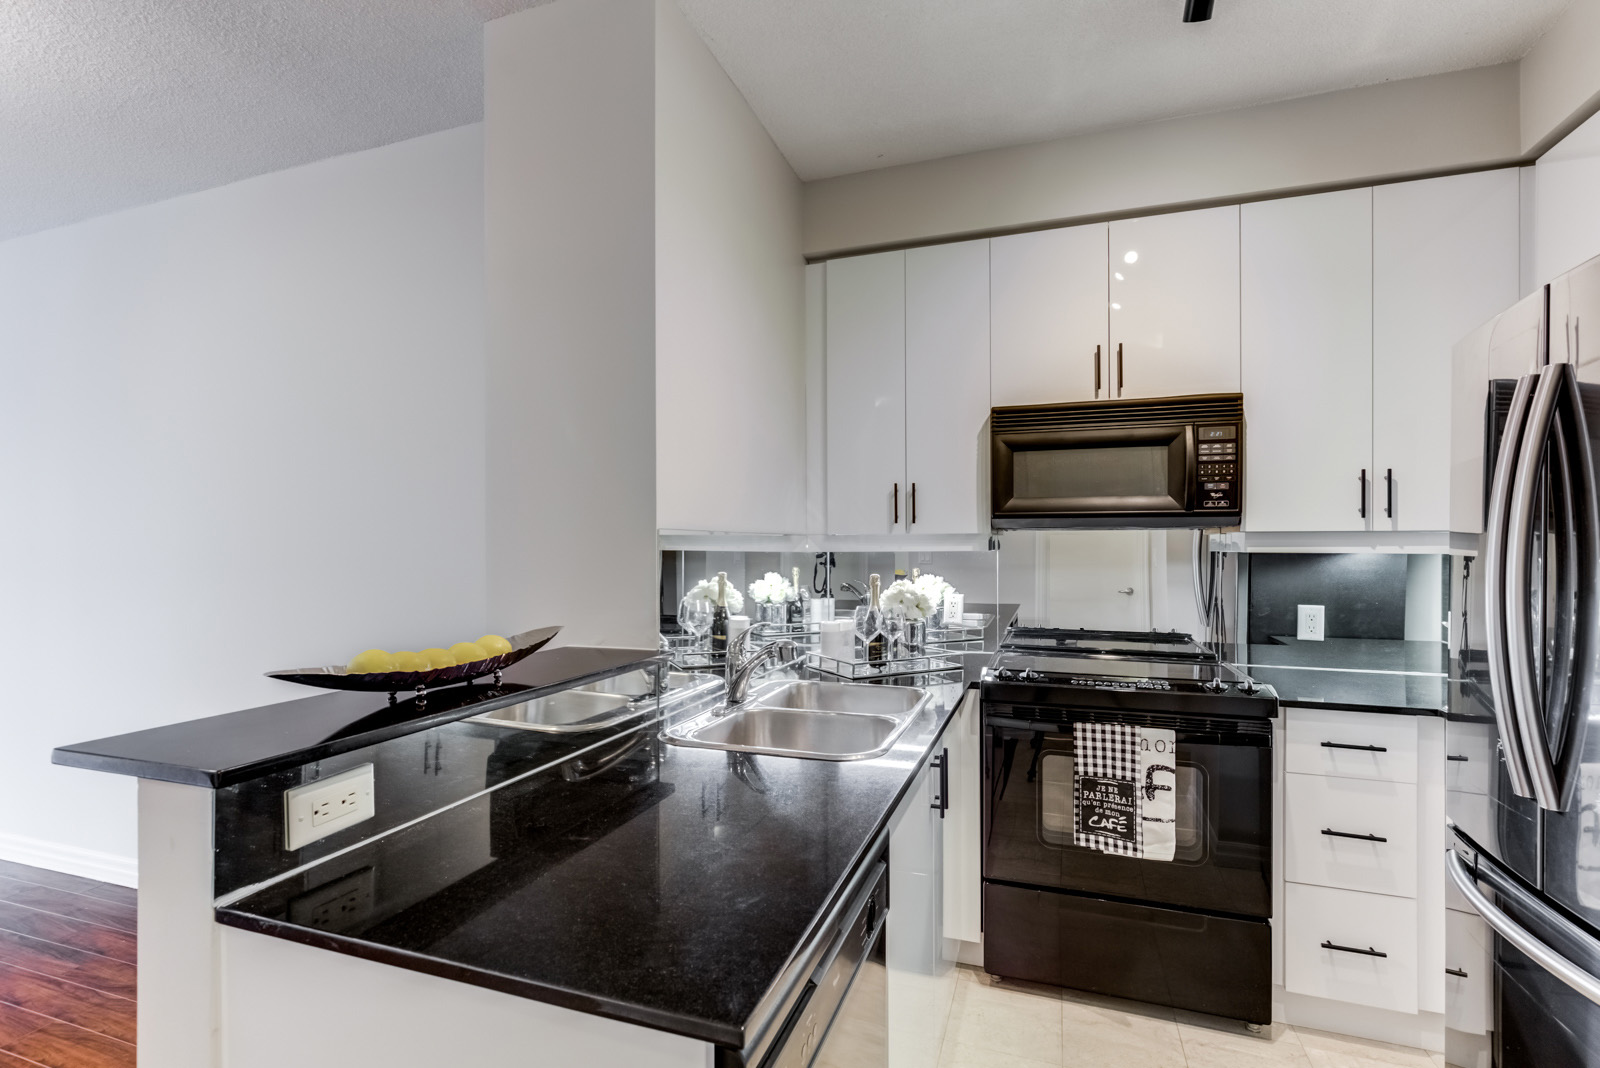 Renovated kitchen with black counters, stove and fridge and white cabinets at 300 Bloor St E Unit 1809.